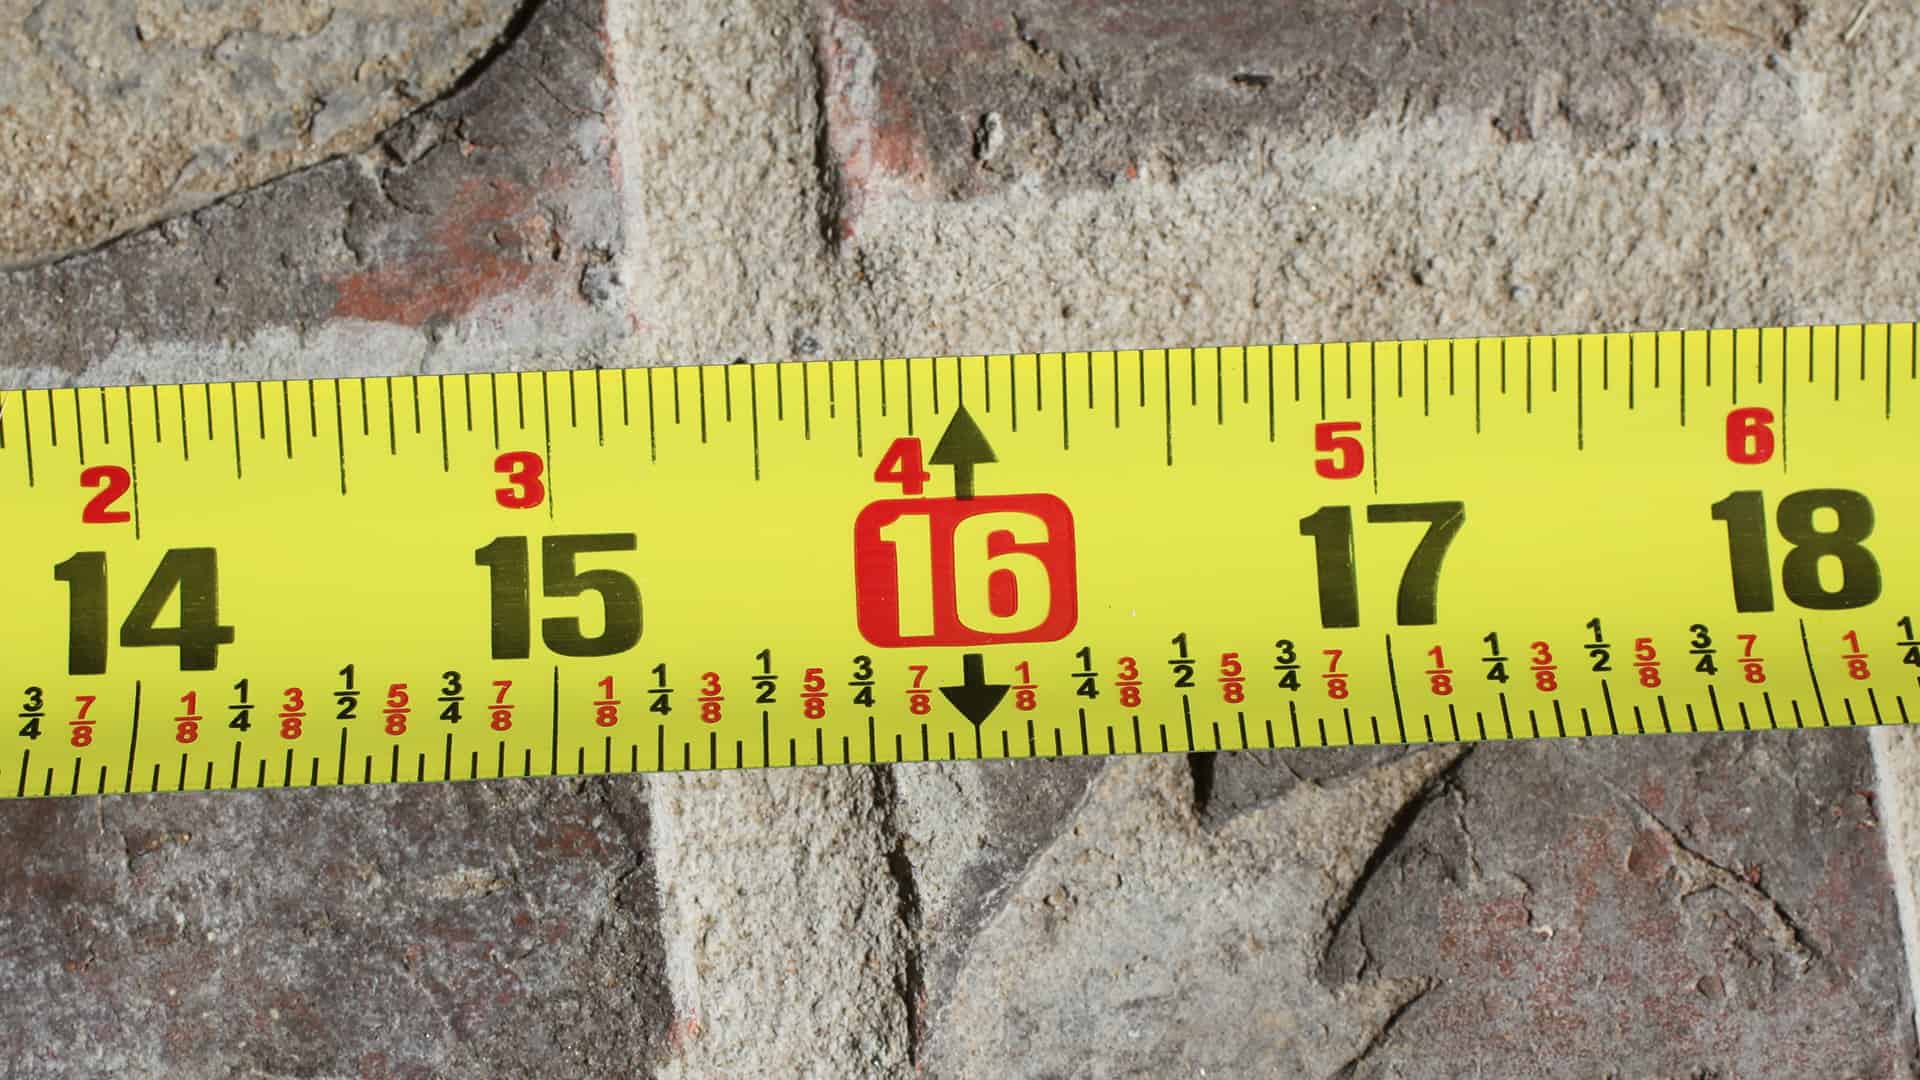 How to use a Tape Measure (The Right Way) - The Geek Pub